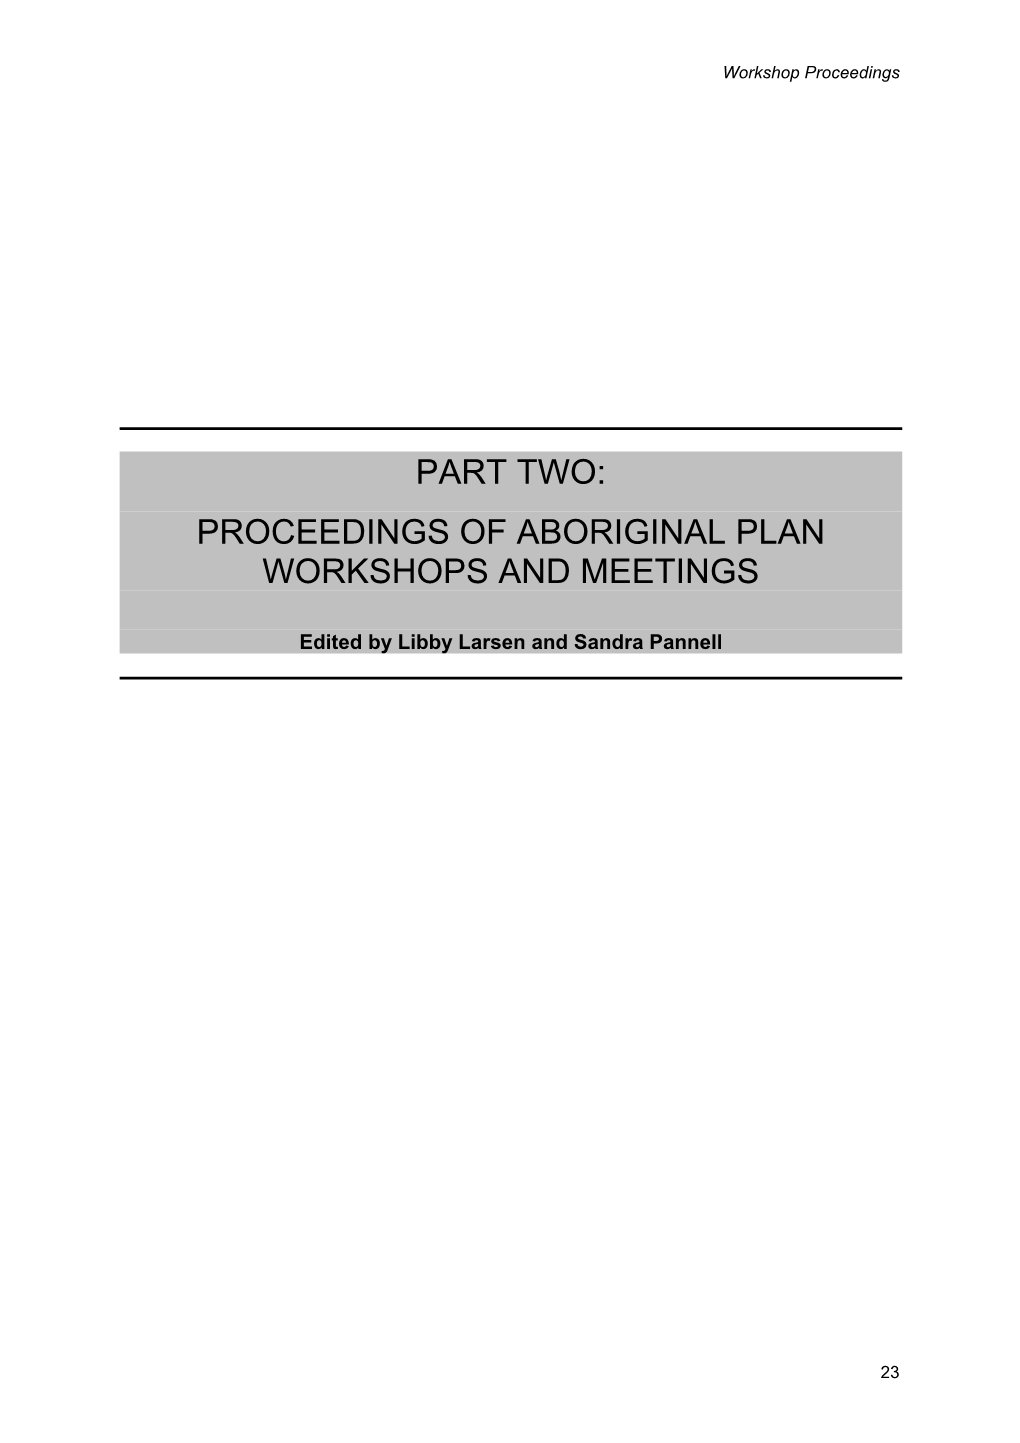 Developing the Wet Tropics Aboriginal Cultural and Natural Resource Management Plan